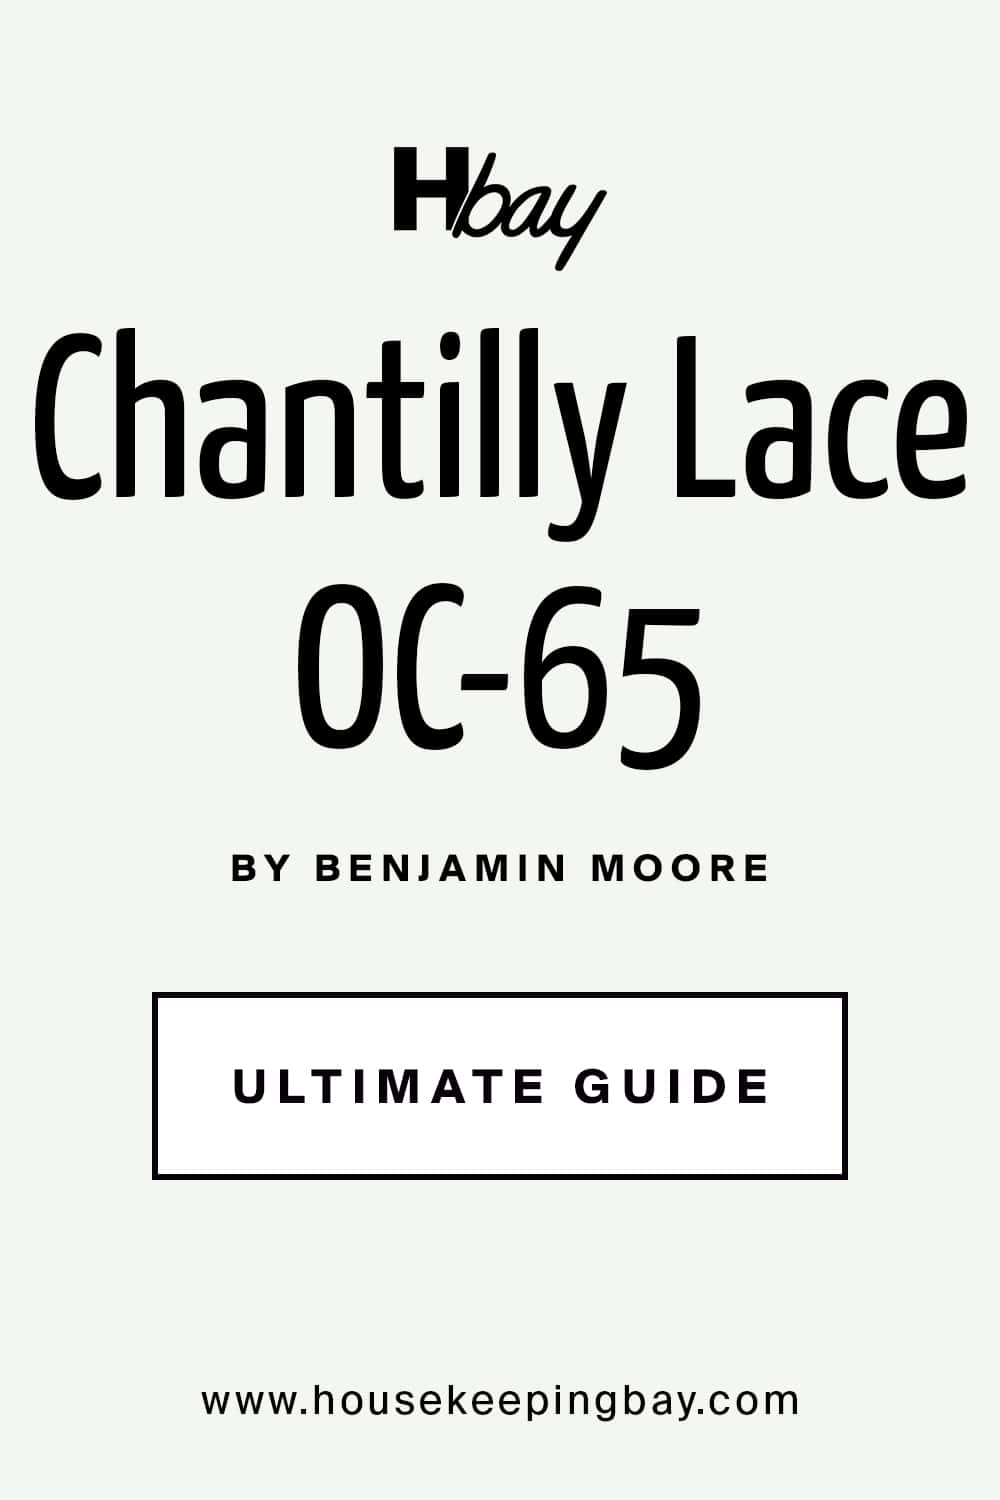 Chantilly Lace OC 65 Paint Color by Benjamin Moore Ultimate Guide